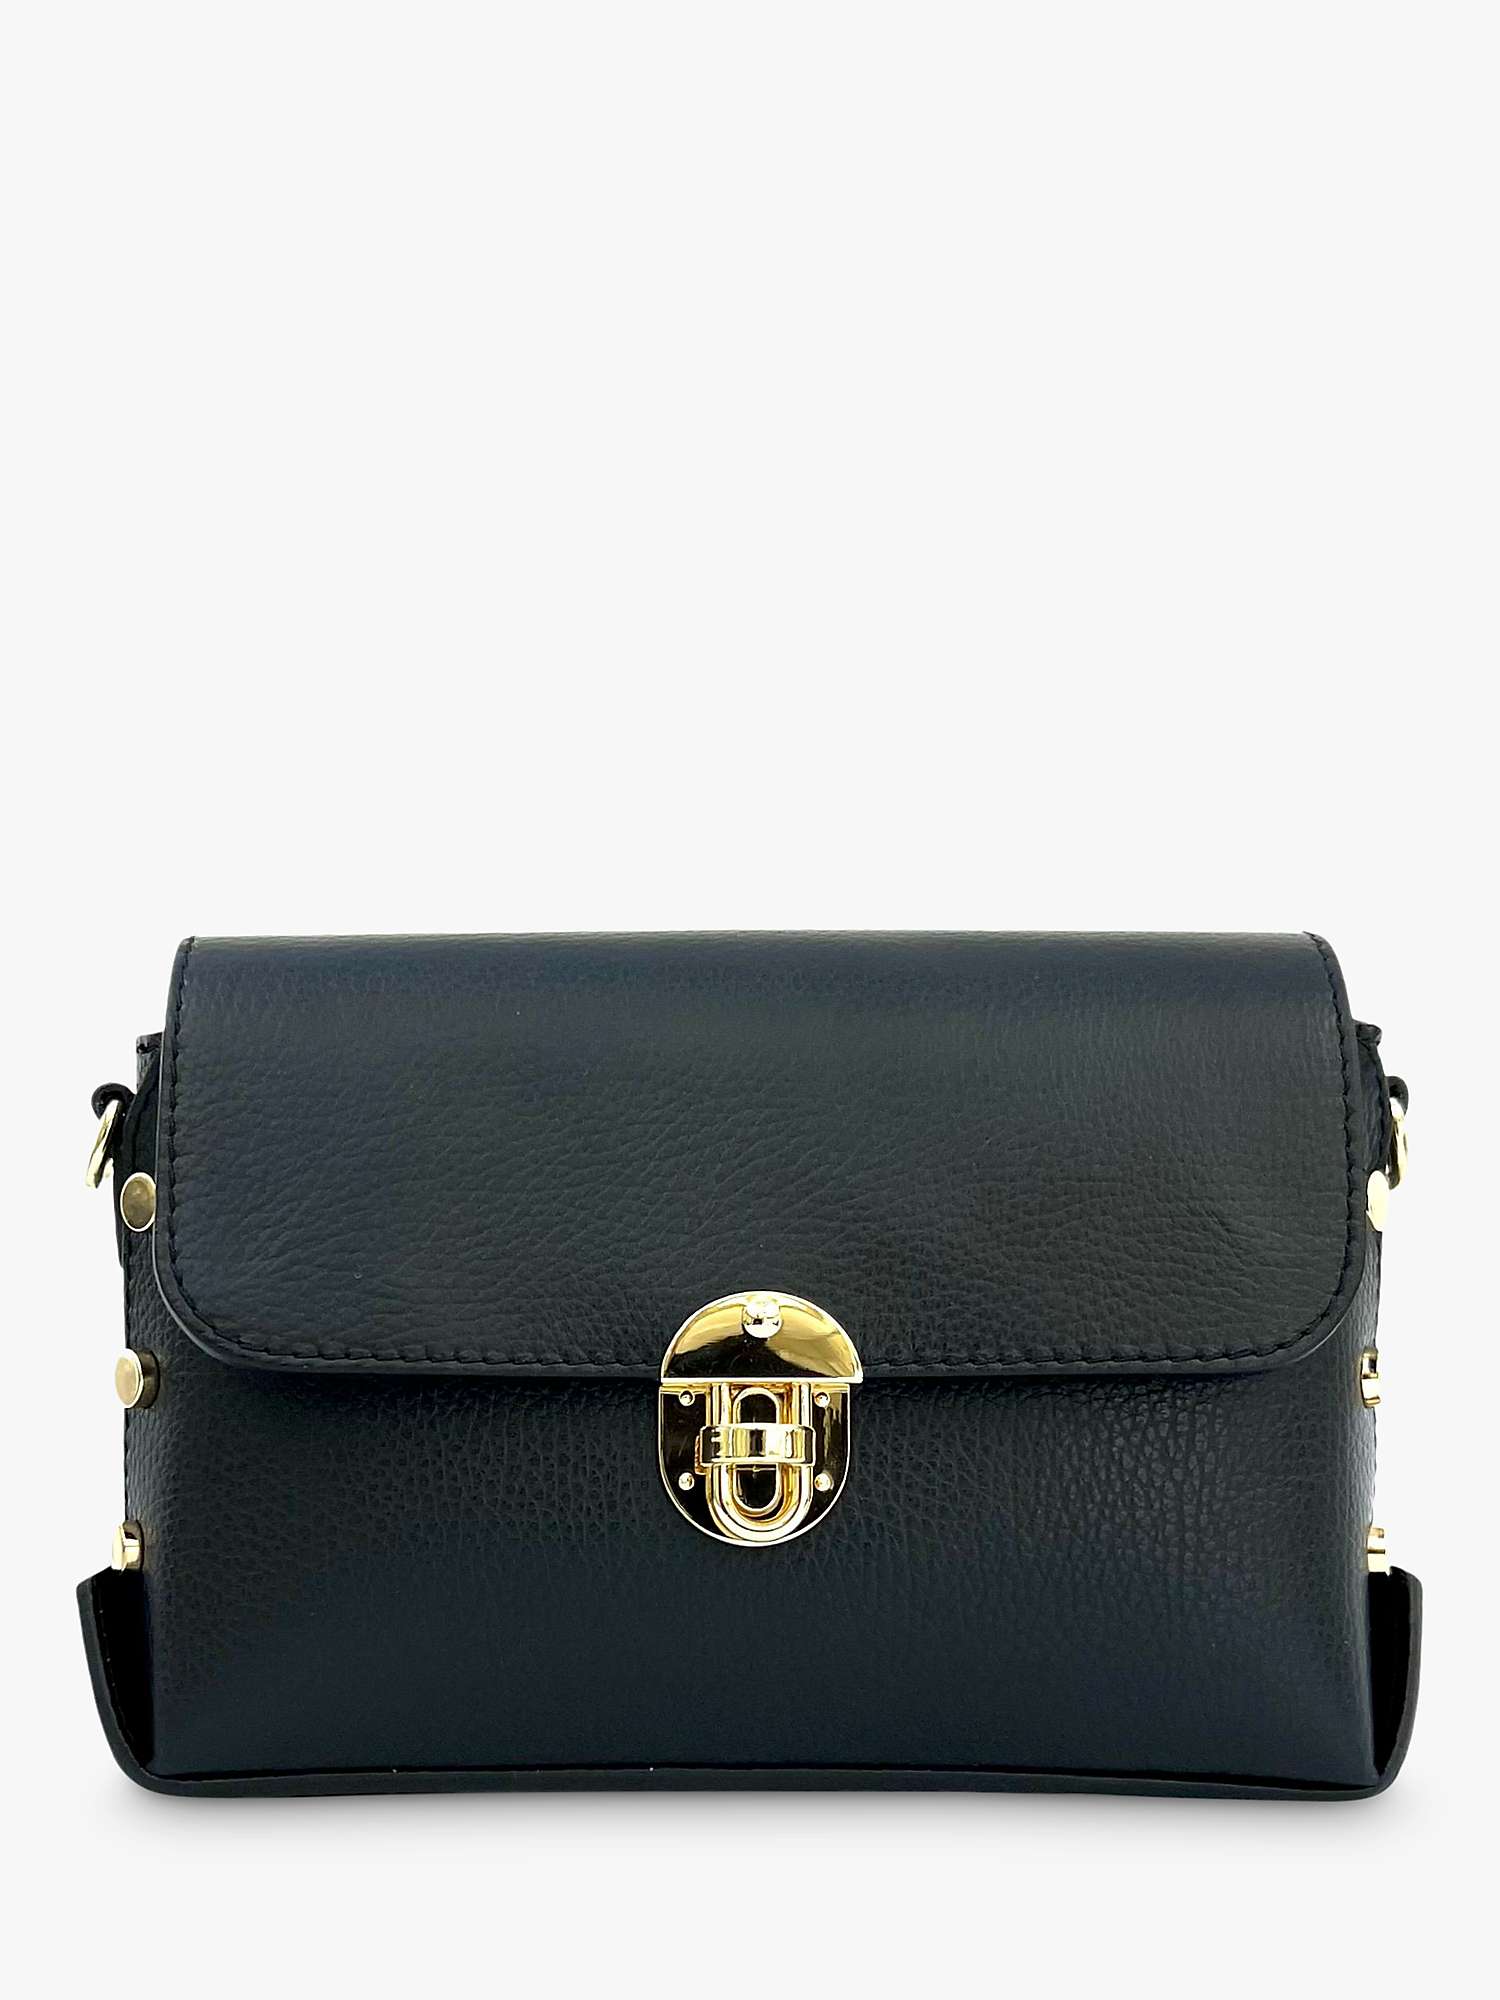 Buy Apatchy The Bloxsome Leather Crossbody Bag Online at johnlewis.com